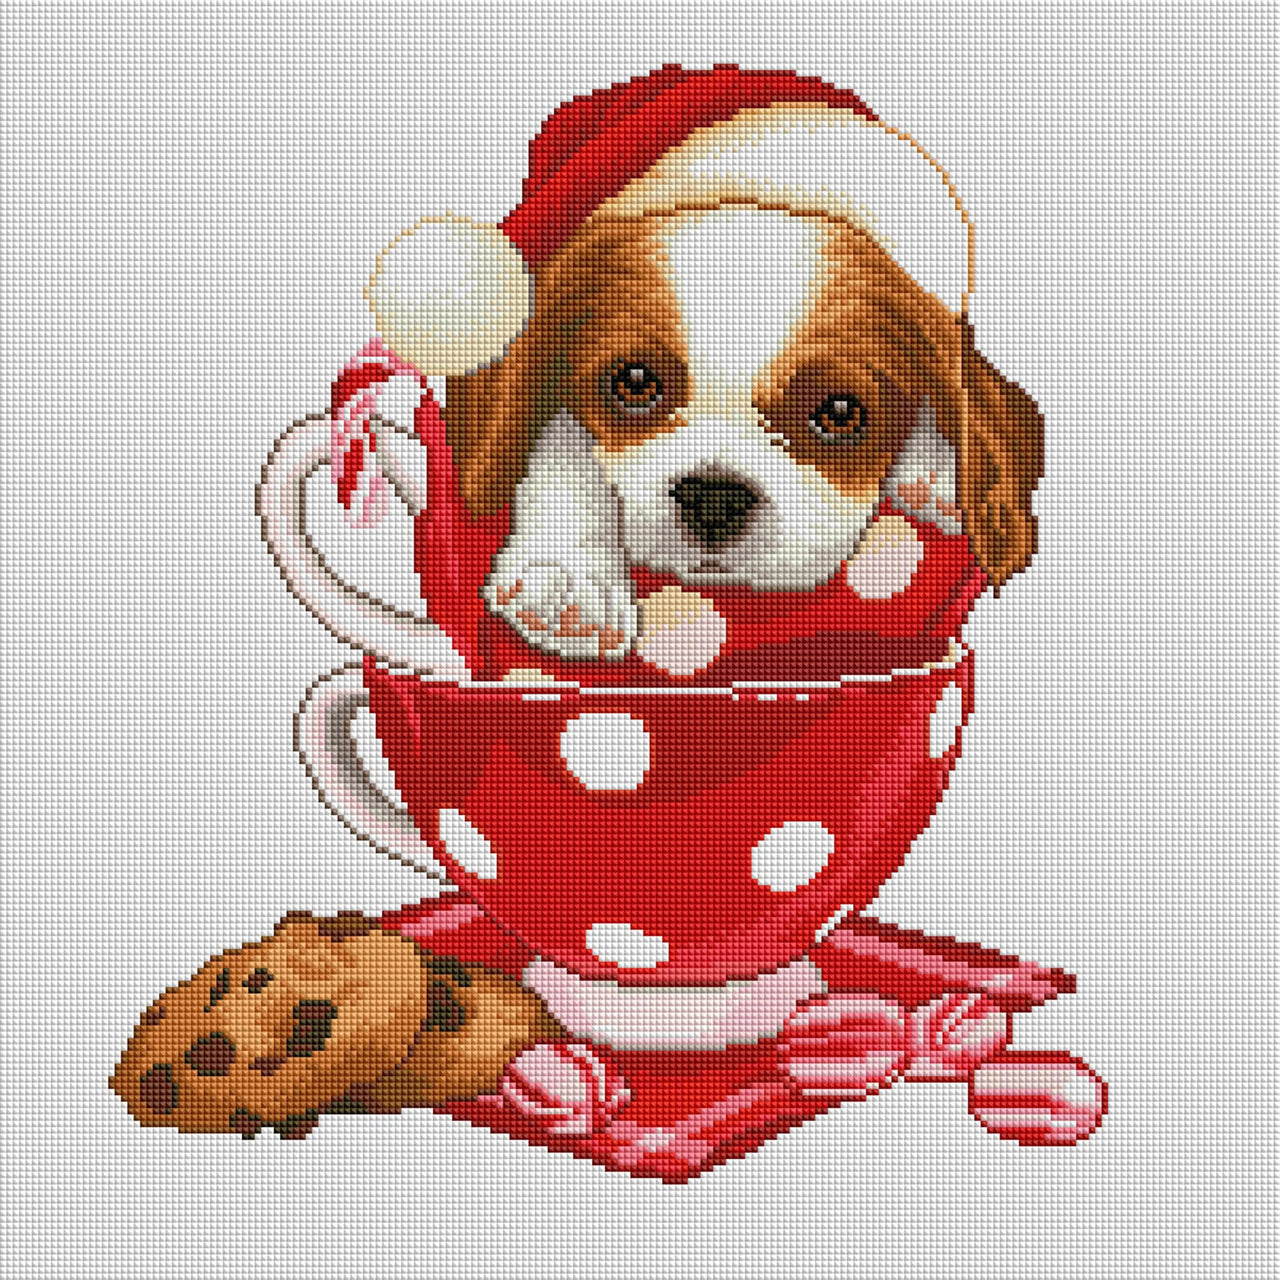 Diamond Painting Christmas King Charles 20" x 20″ (51cm x 51cm) / Square with 36 Colors including 4 ABs / 40,401